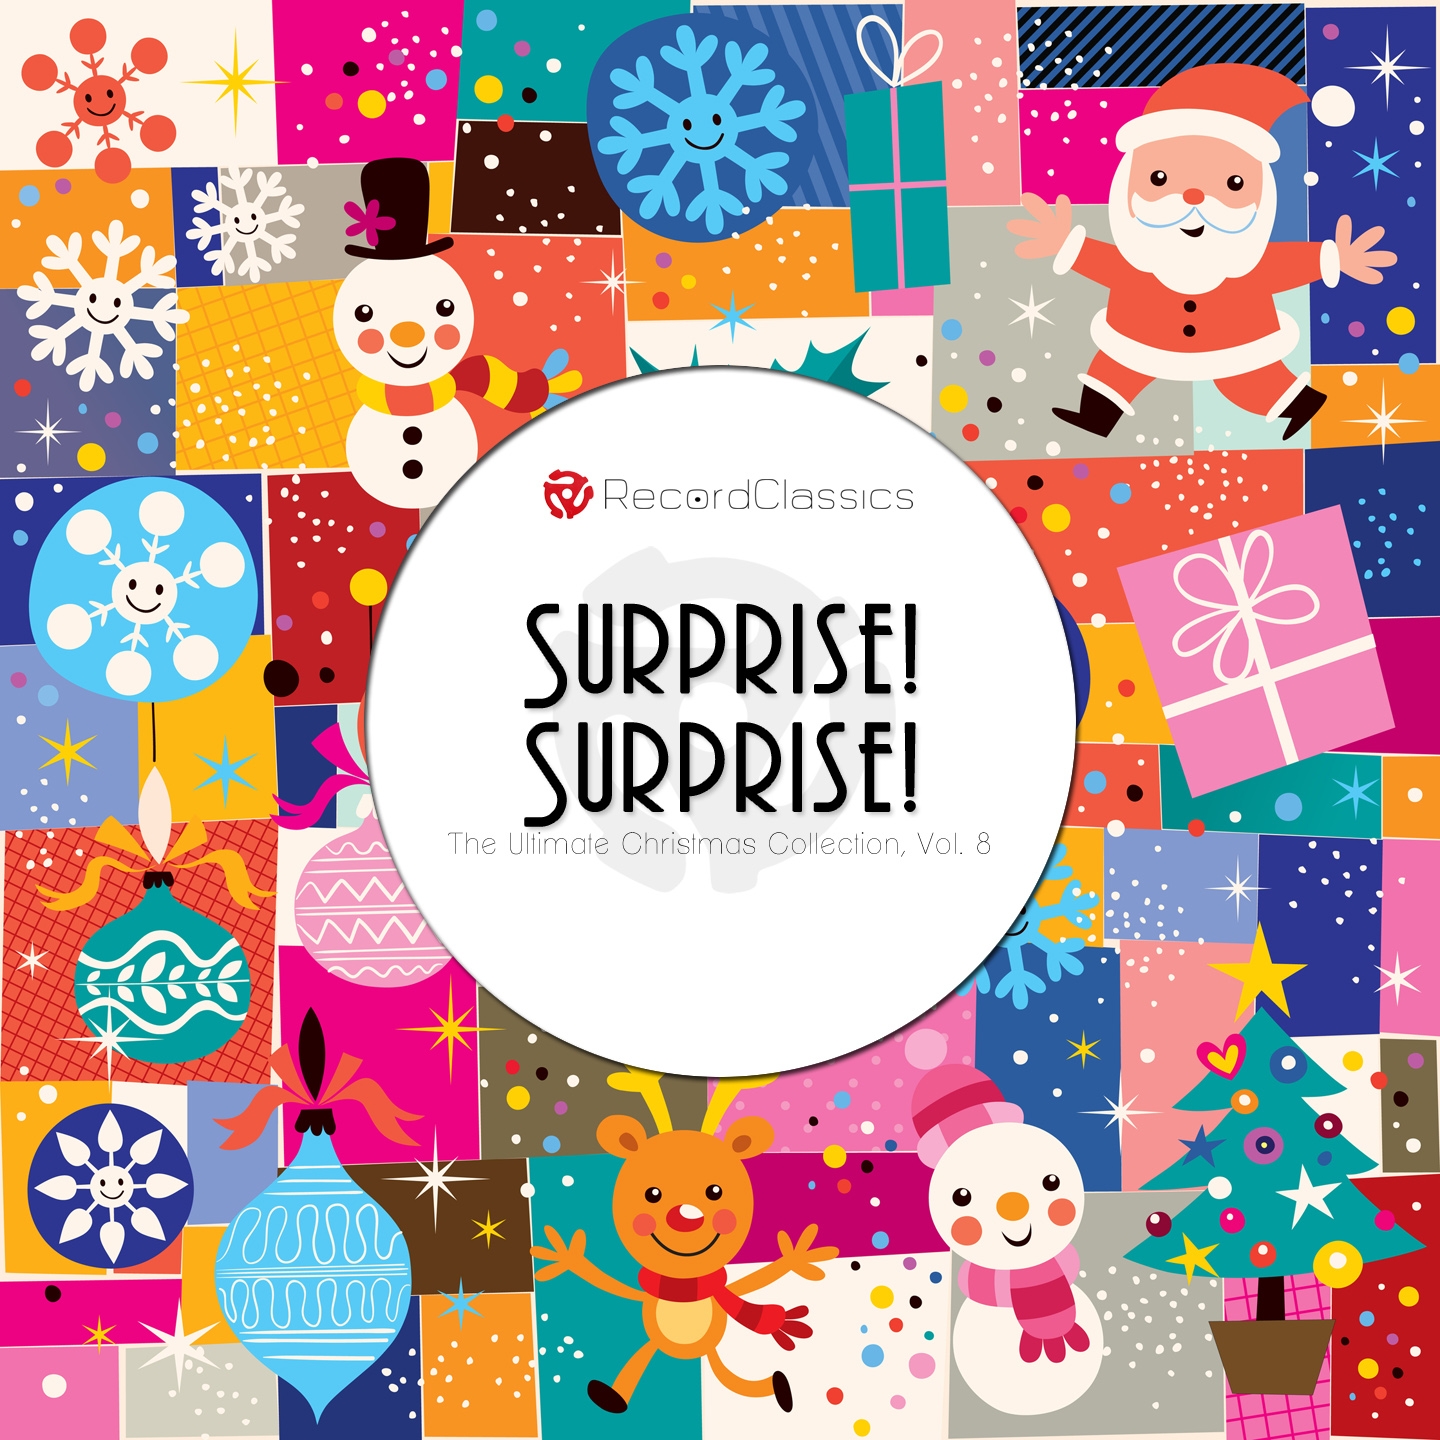 Surprise! Surprise!, Vol. 8 (The Ultimate Christmas Collection)